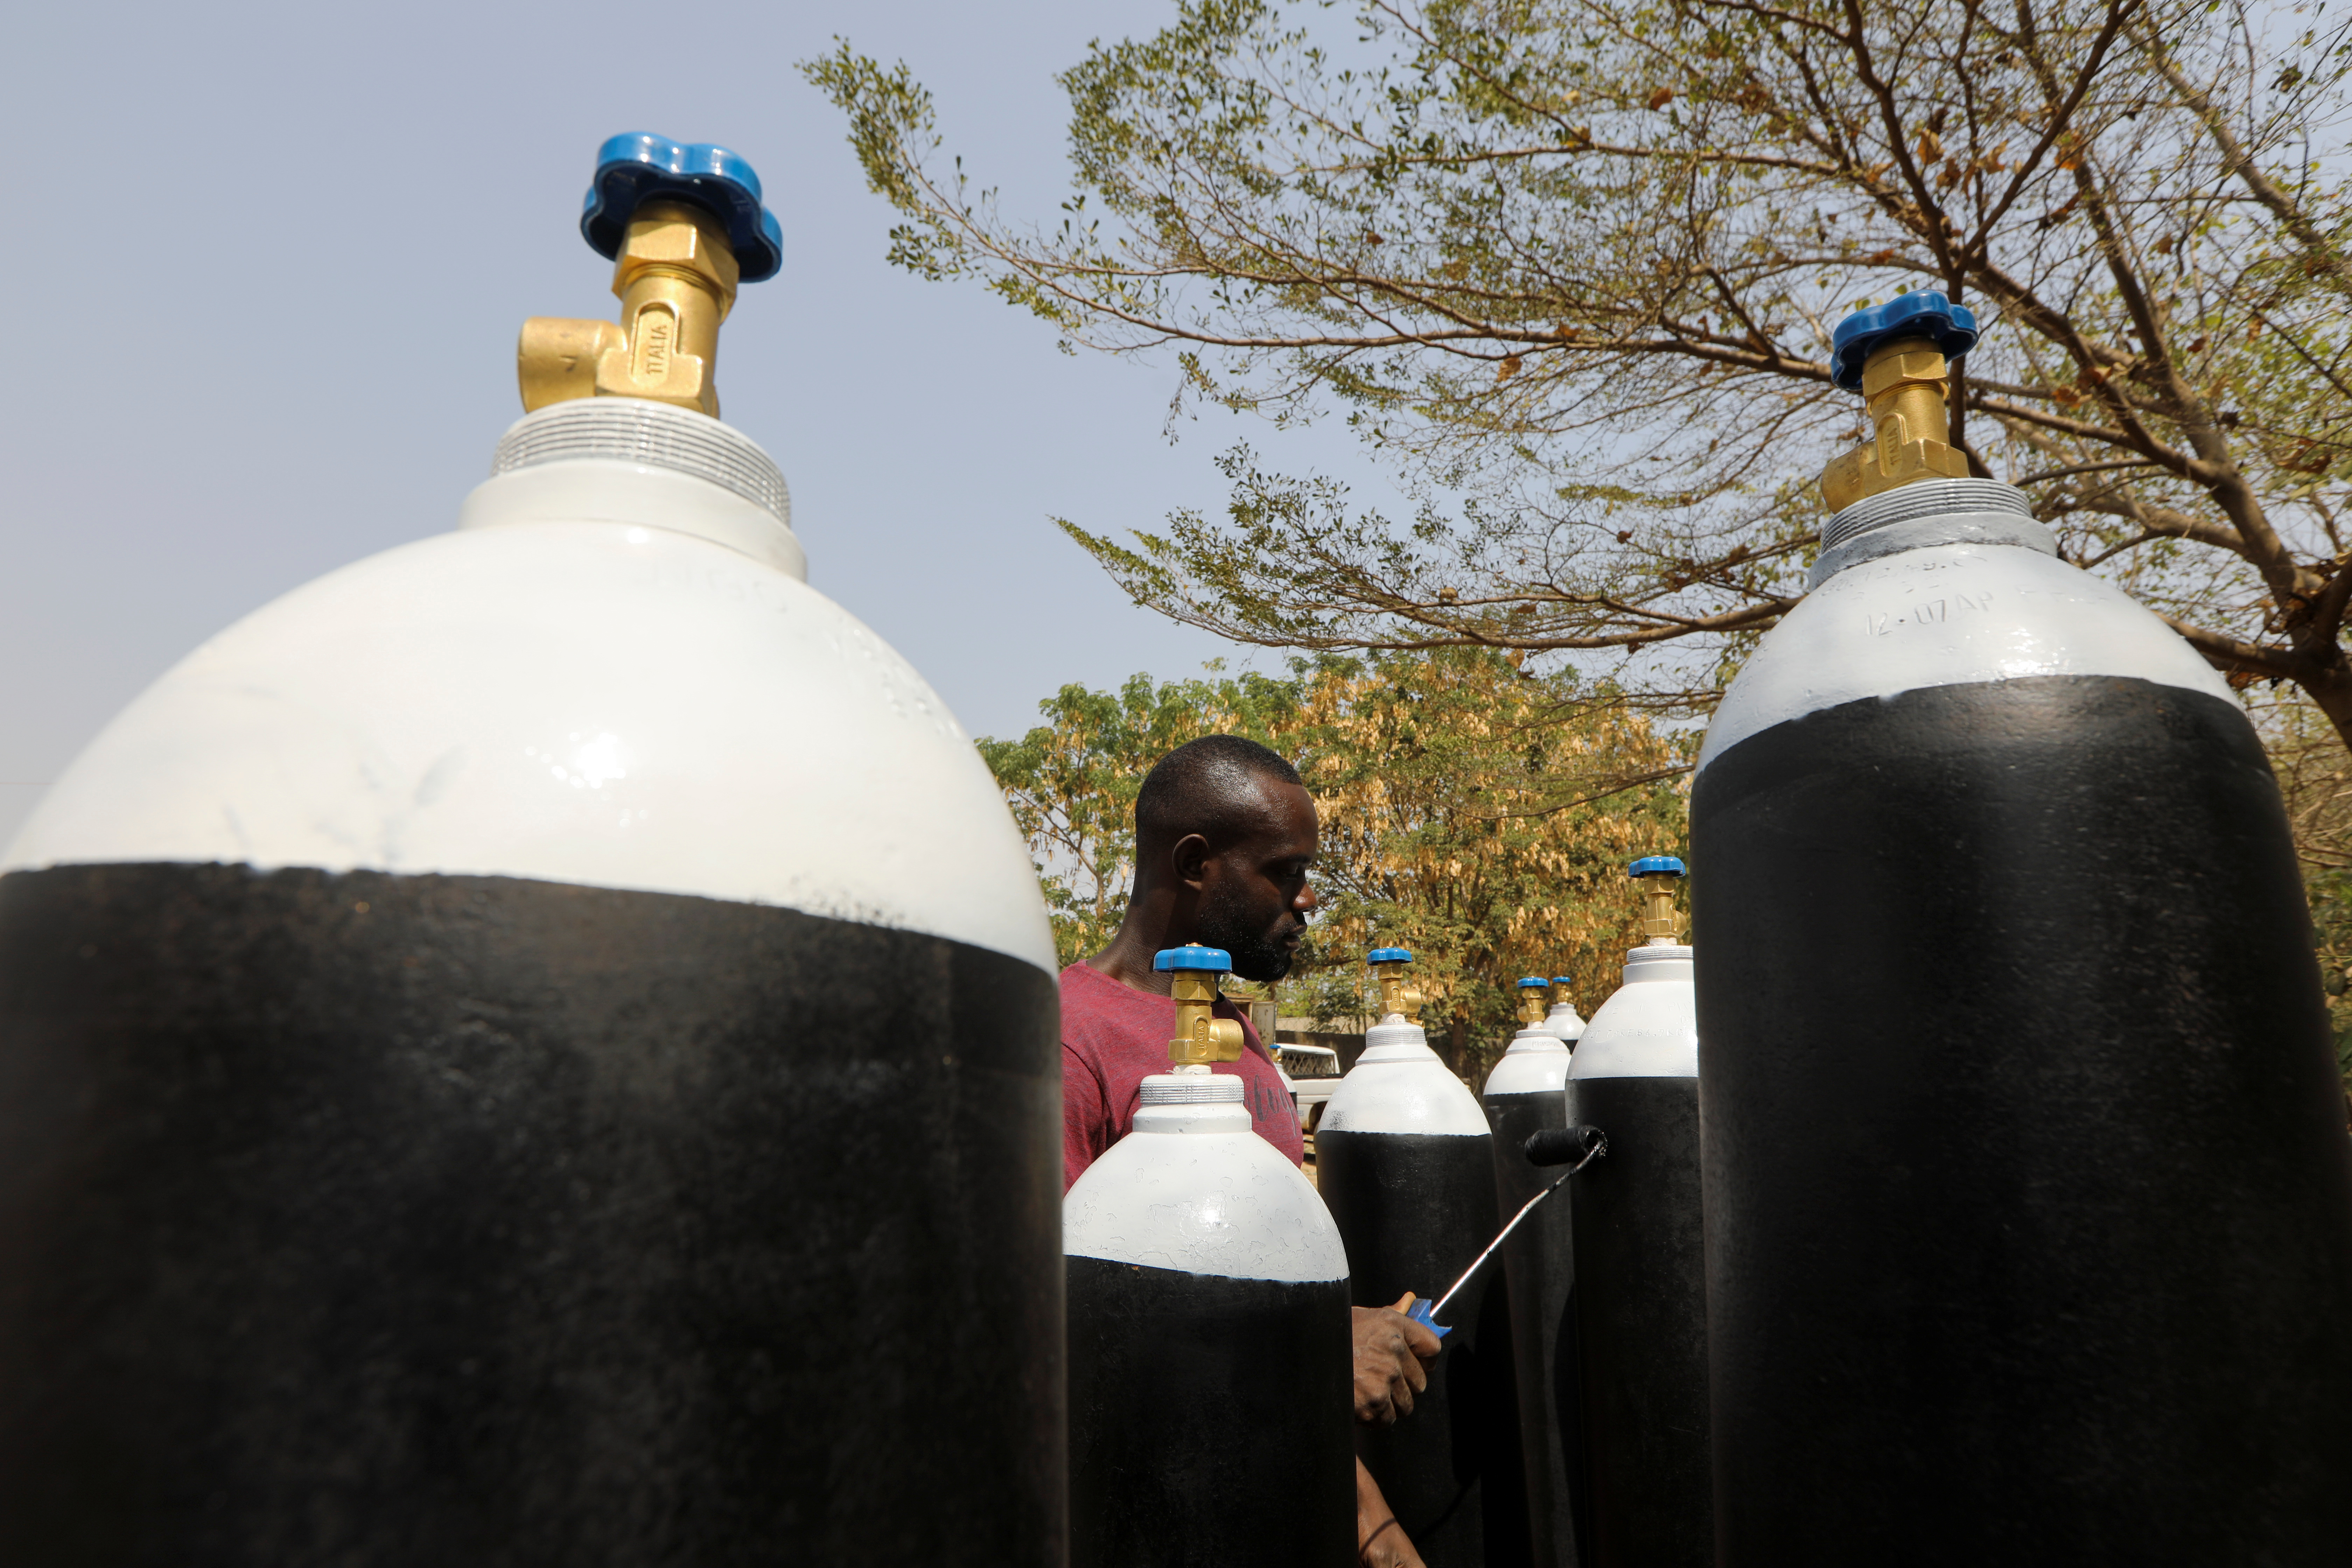 Man paints bottles used for storing oxygen in Abuja